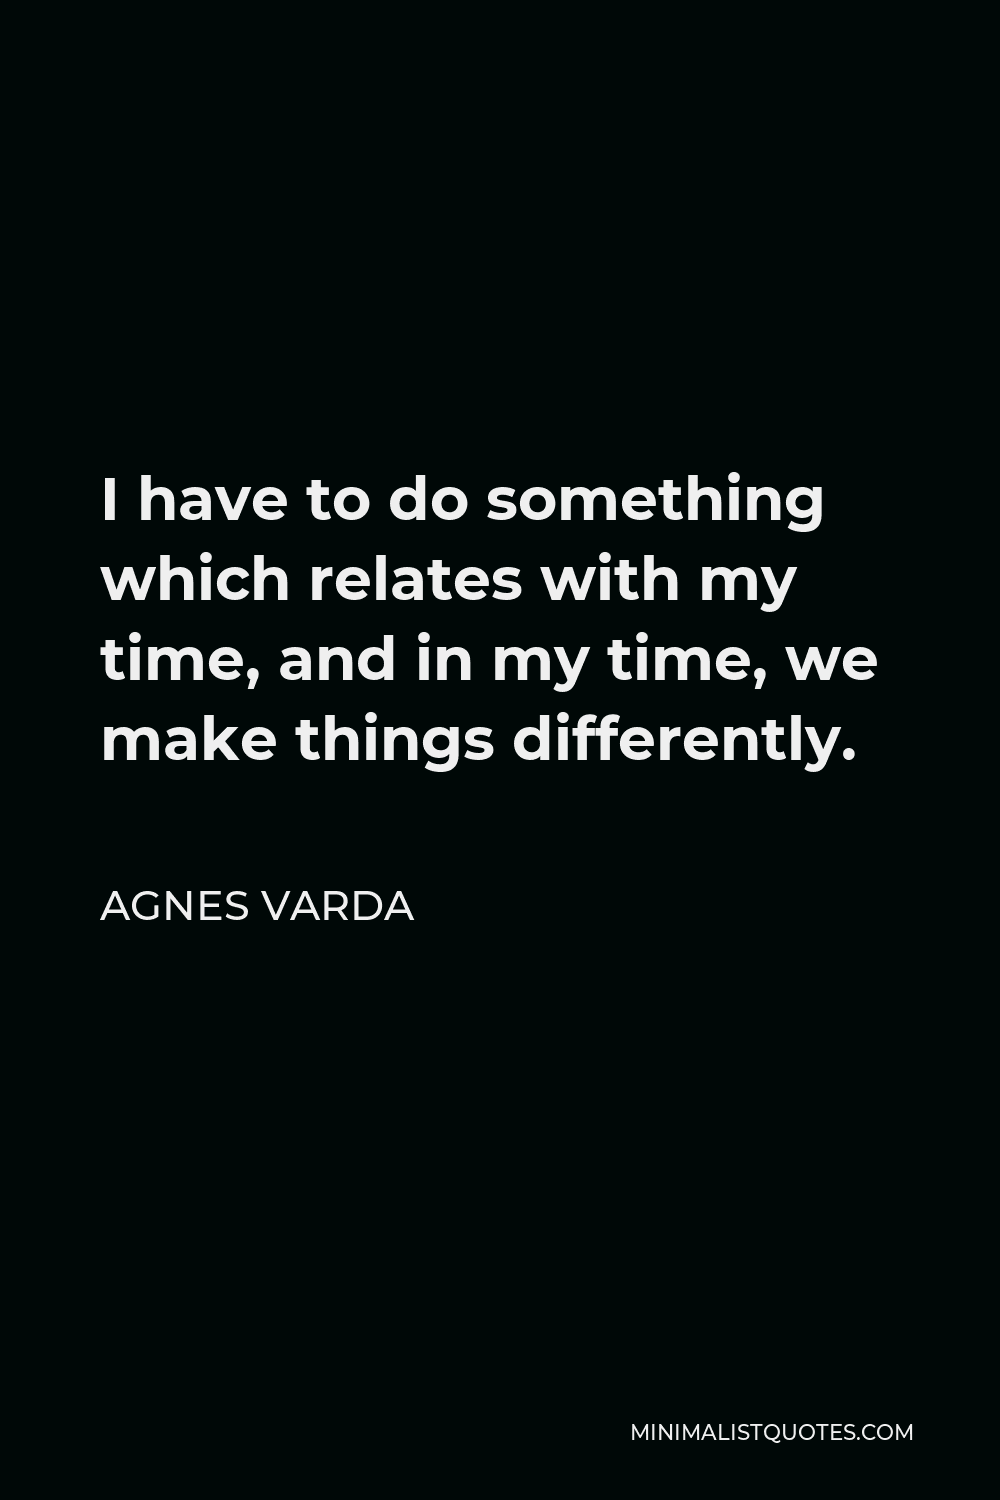 Agnes Varda Quote - I have to do something which relates with my time, and in my time, we make things differently.